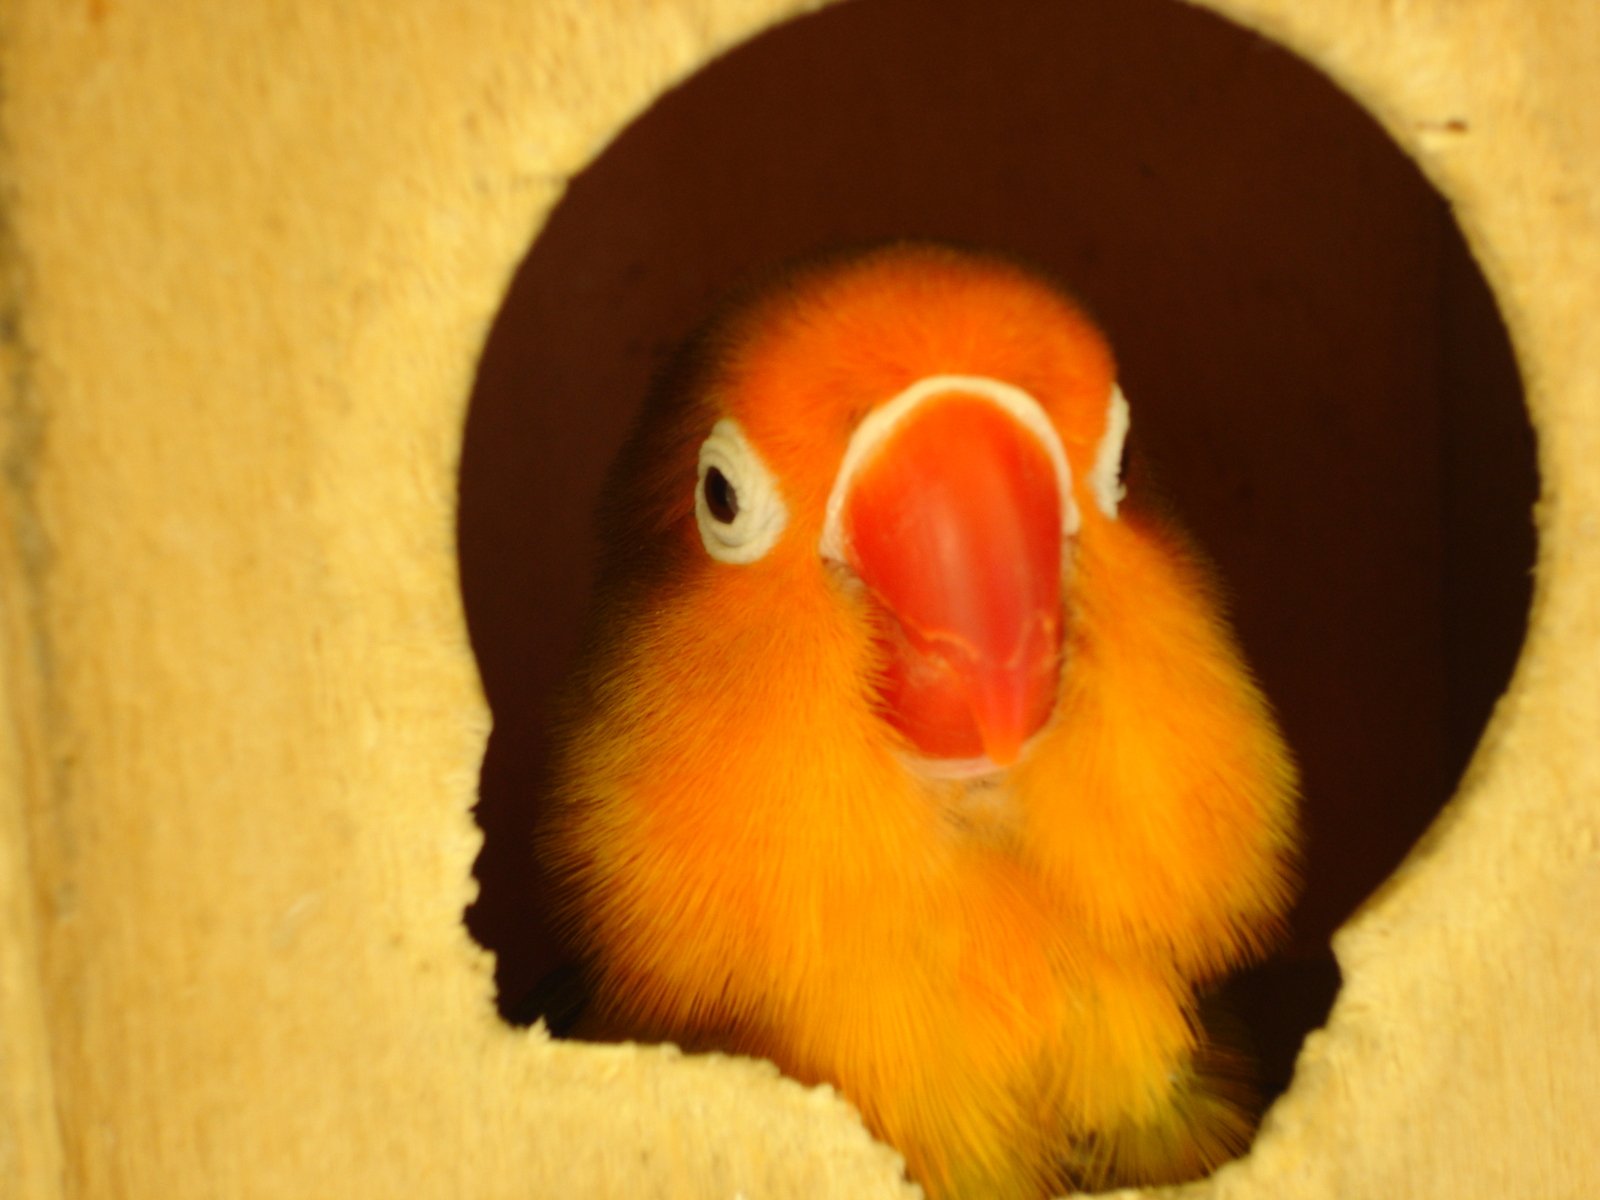 an orange bird with an odd look is peering out of its birdhouse